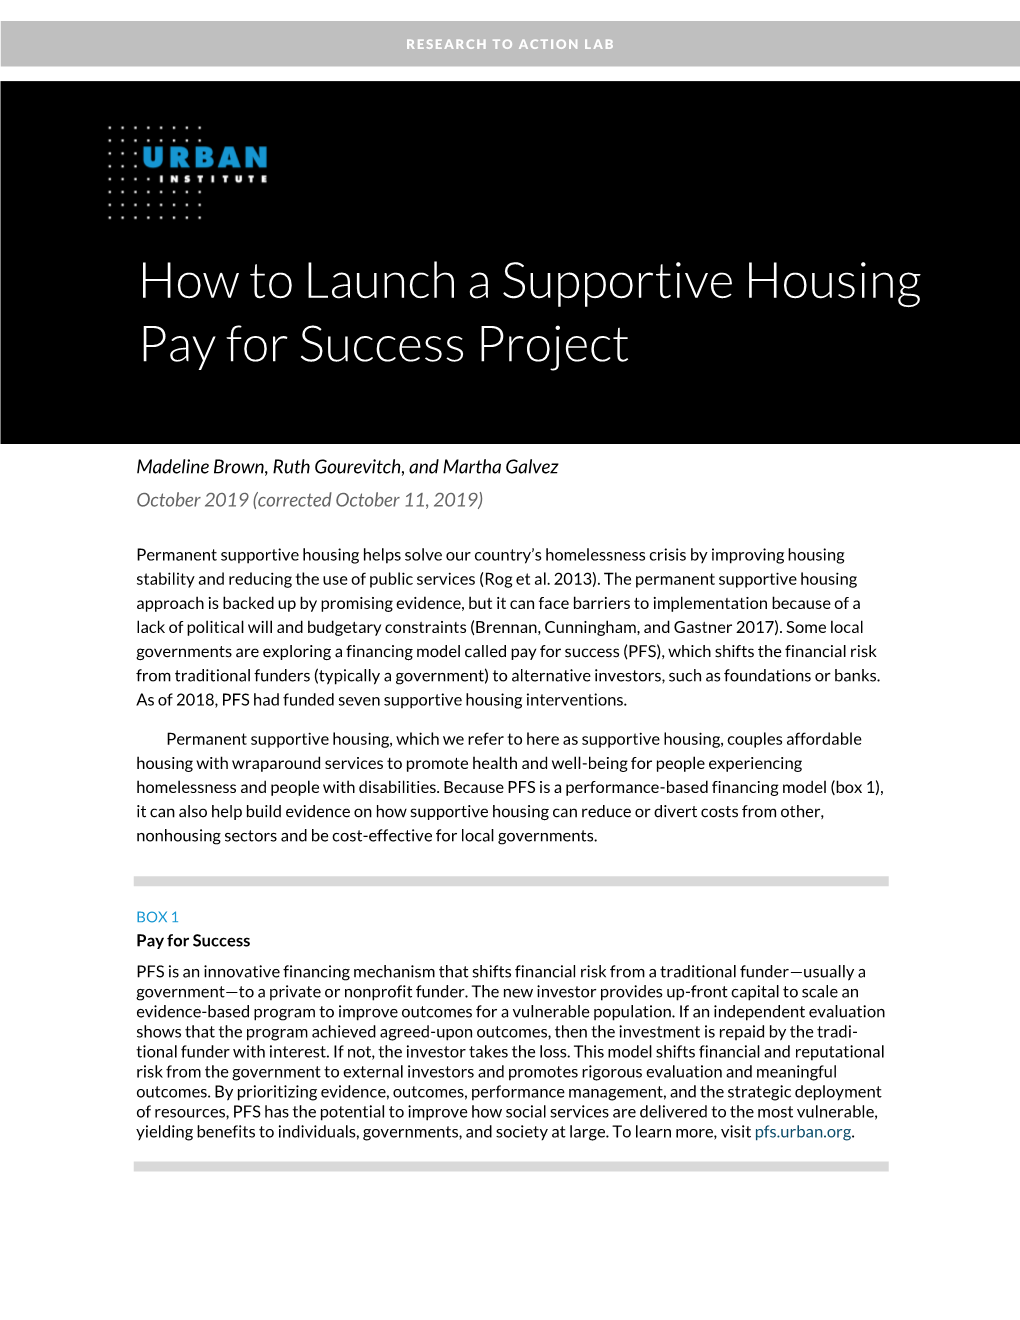 How to Launch a Supportive Housing Pay for Success Initiative